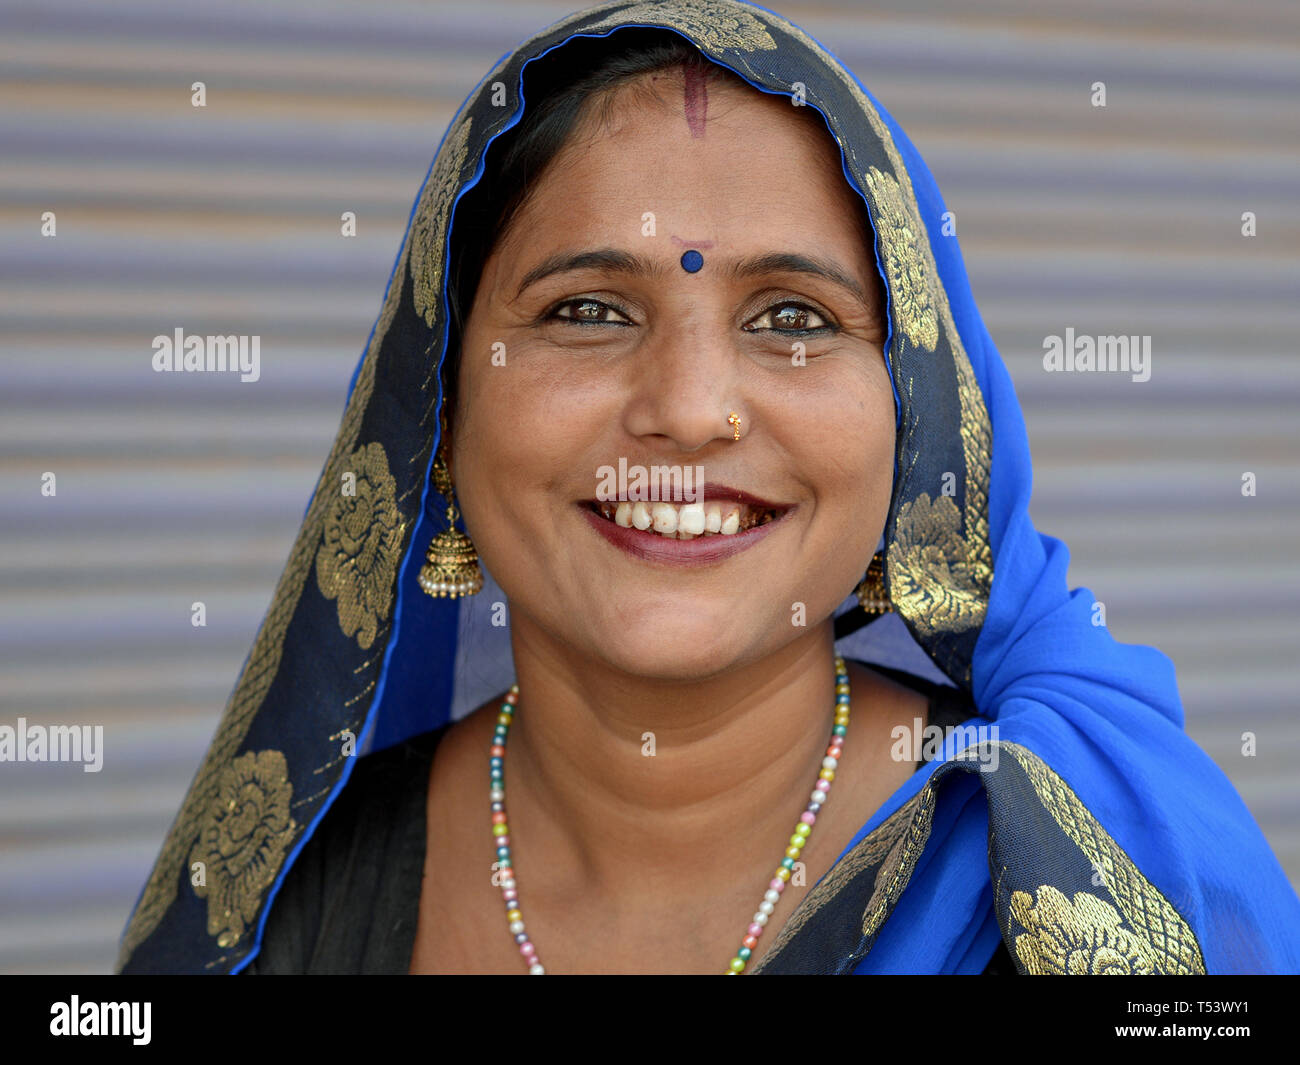 Young Indian Rajasthani woman with blue bindi on her forehead and blue head scarf (dupatta) smiles for the camera. Stock Photo